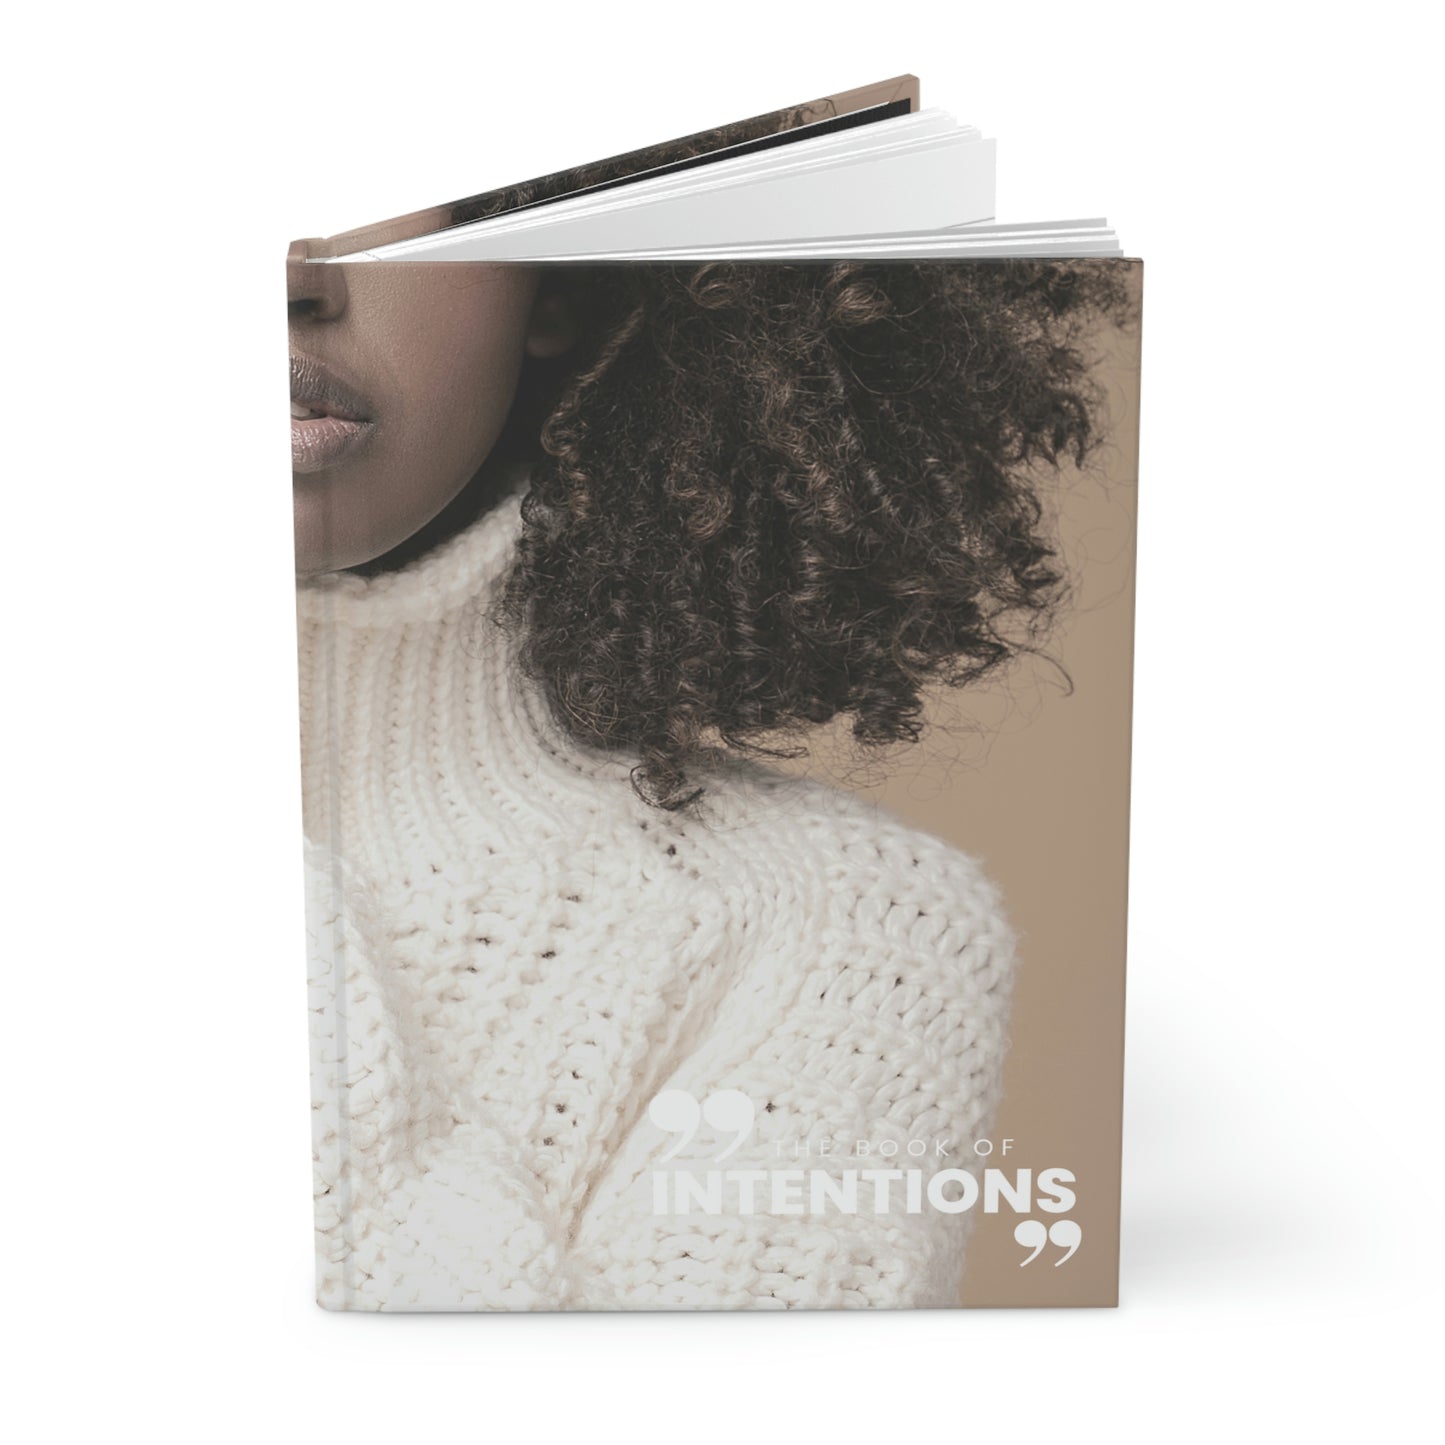 "the book of intentions" Velvety Matte Hardcover Journal